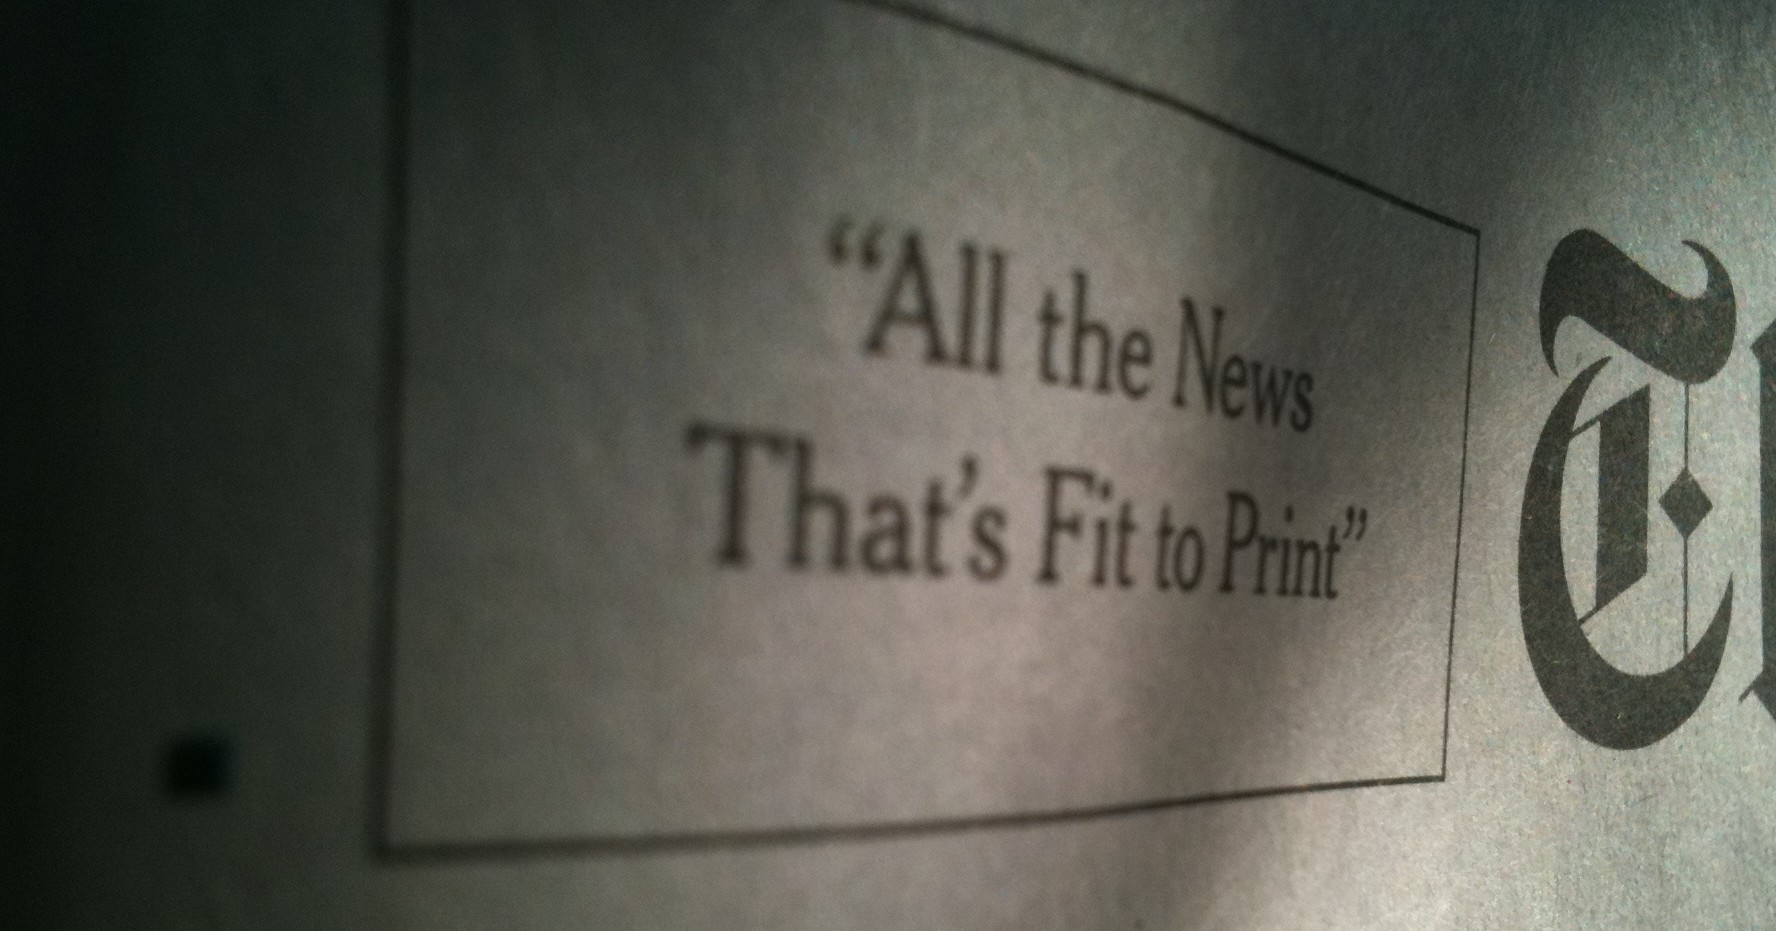 New York public Enough of 'all the Time for what's fit to print. - Columbia Review